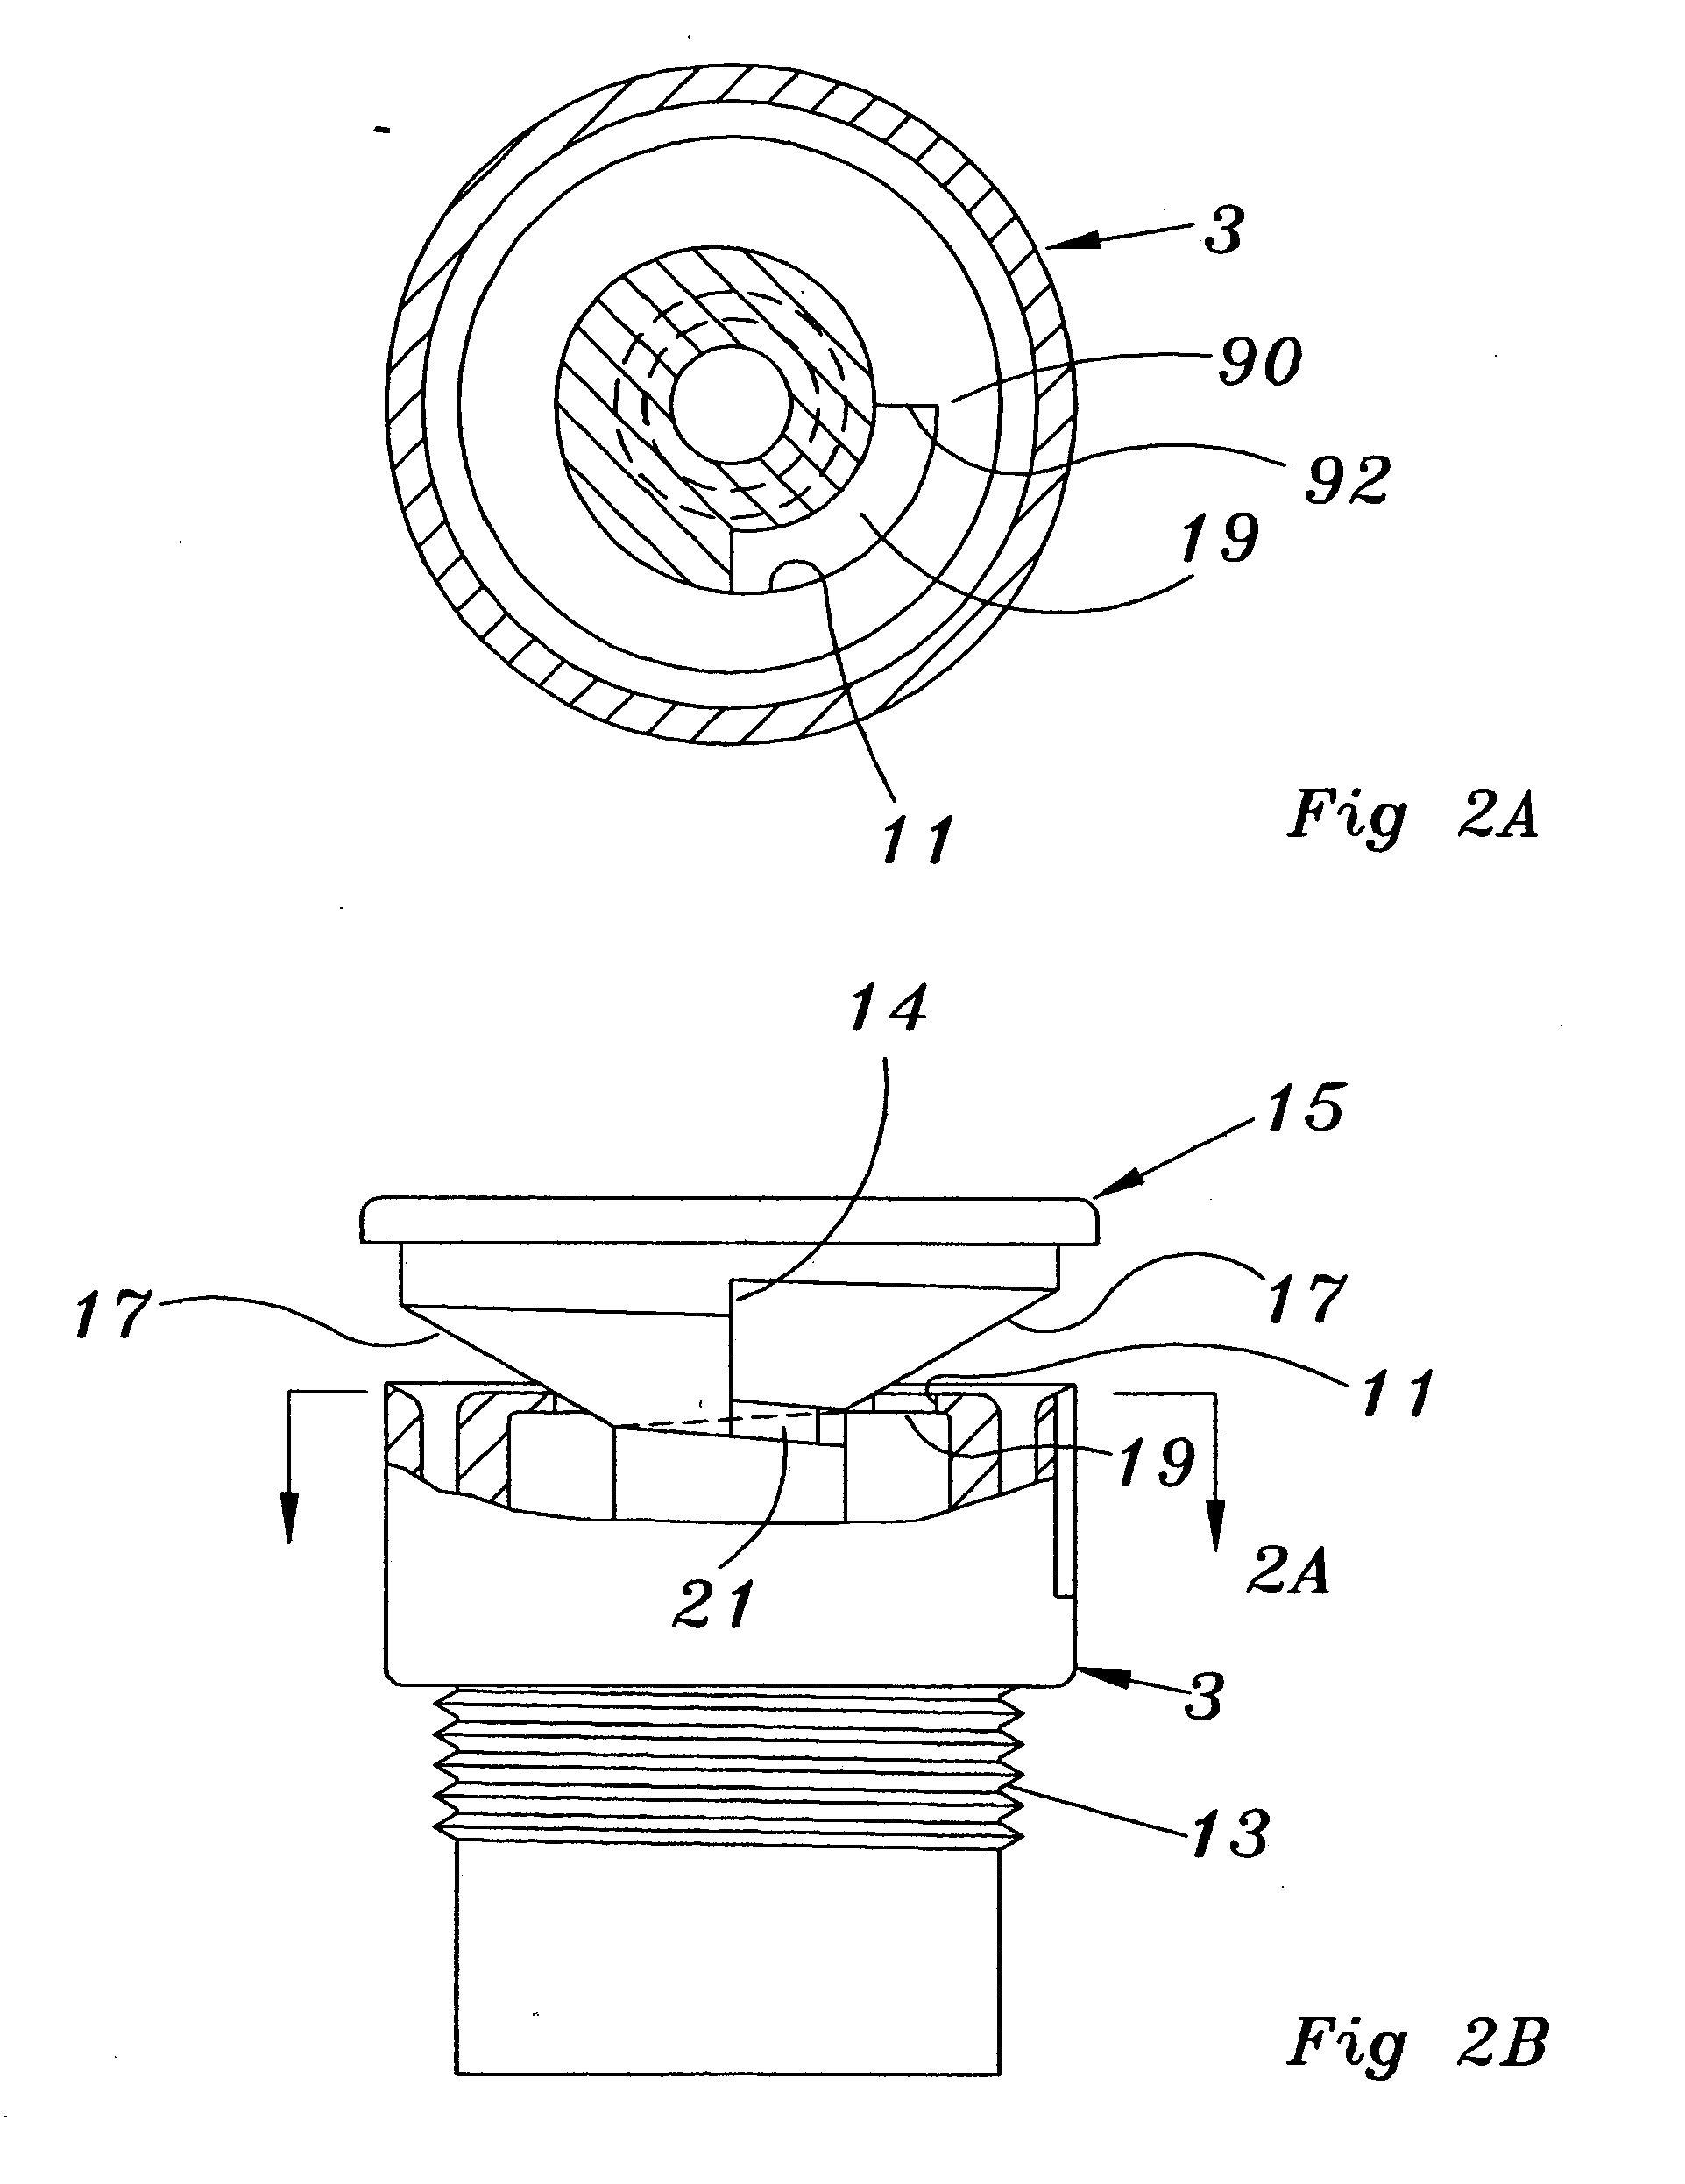 Spray nozzle with adjustable ARC spray elevation angle and flow